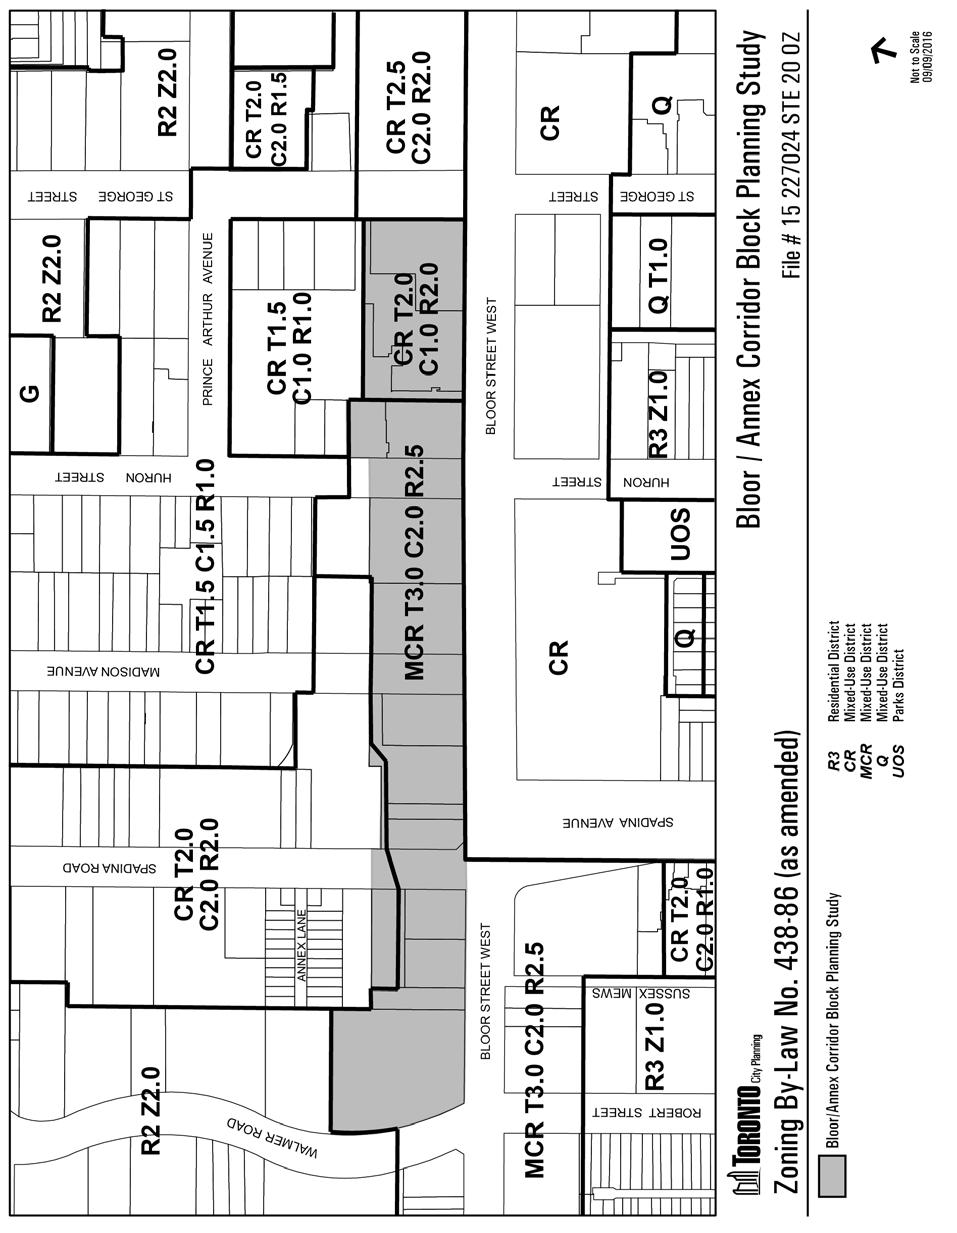 Attachment 6: Zoning Map 438-86 Staff report for action